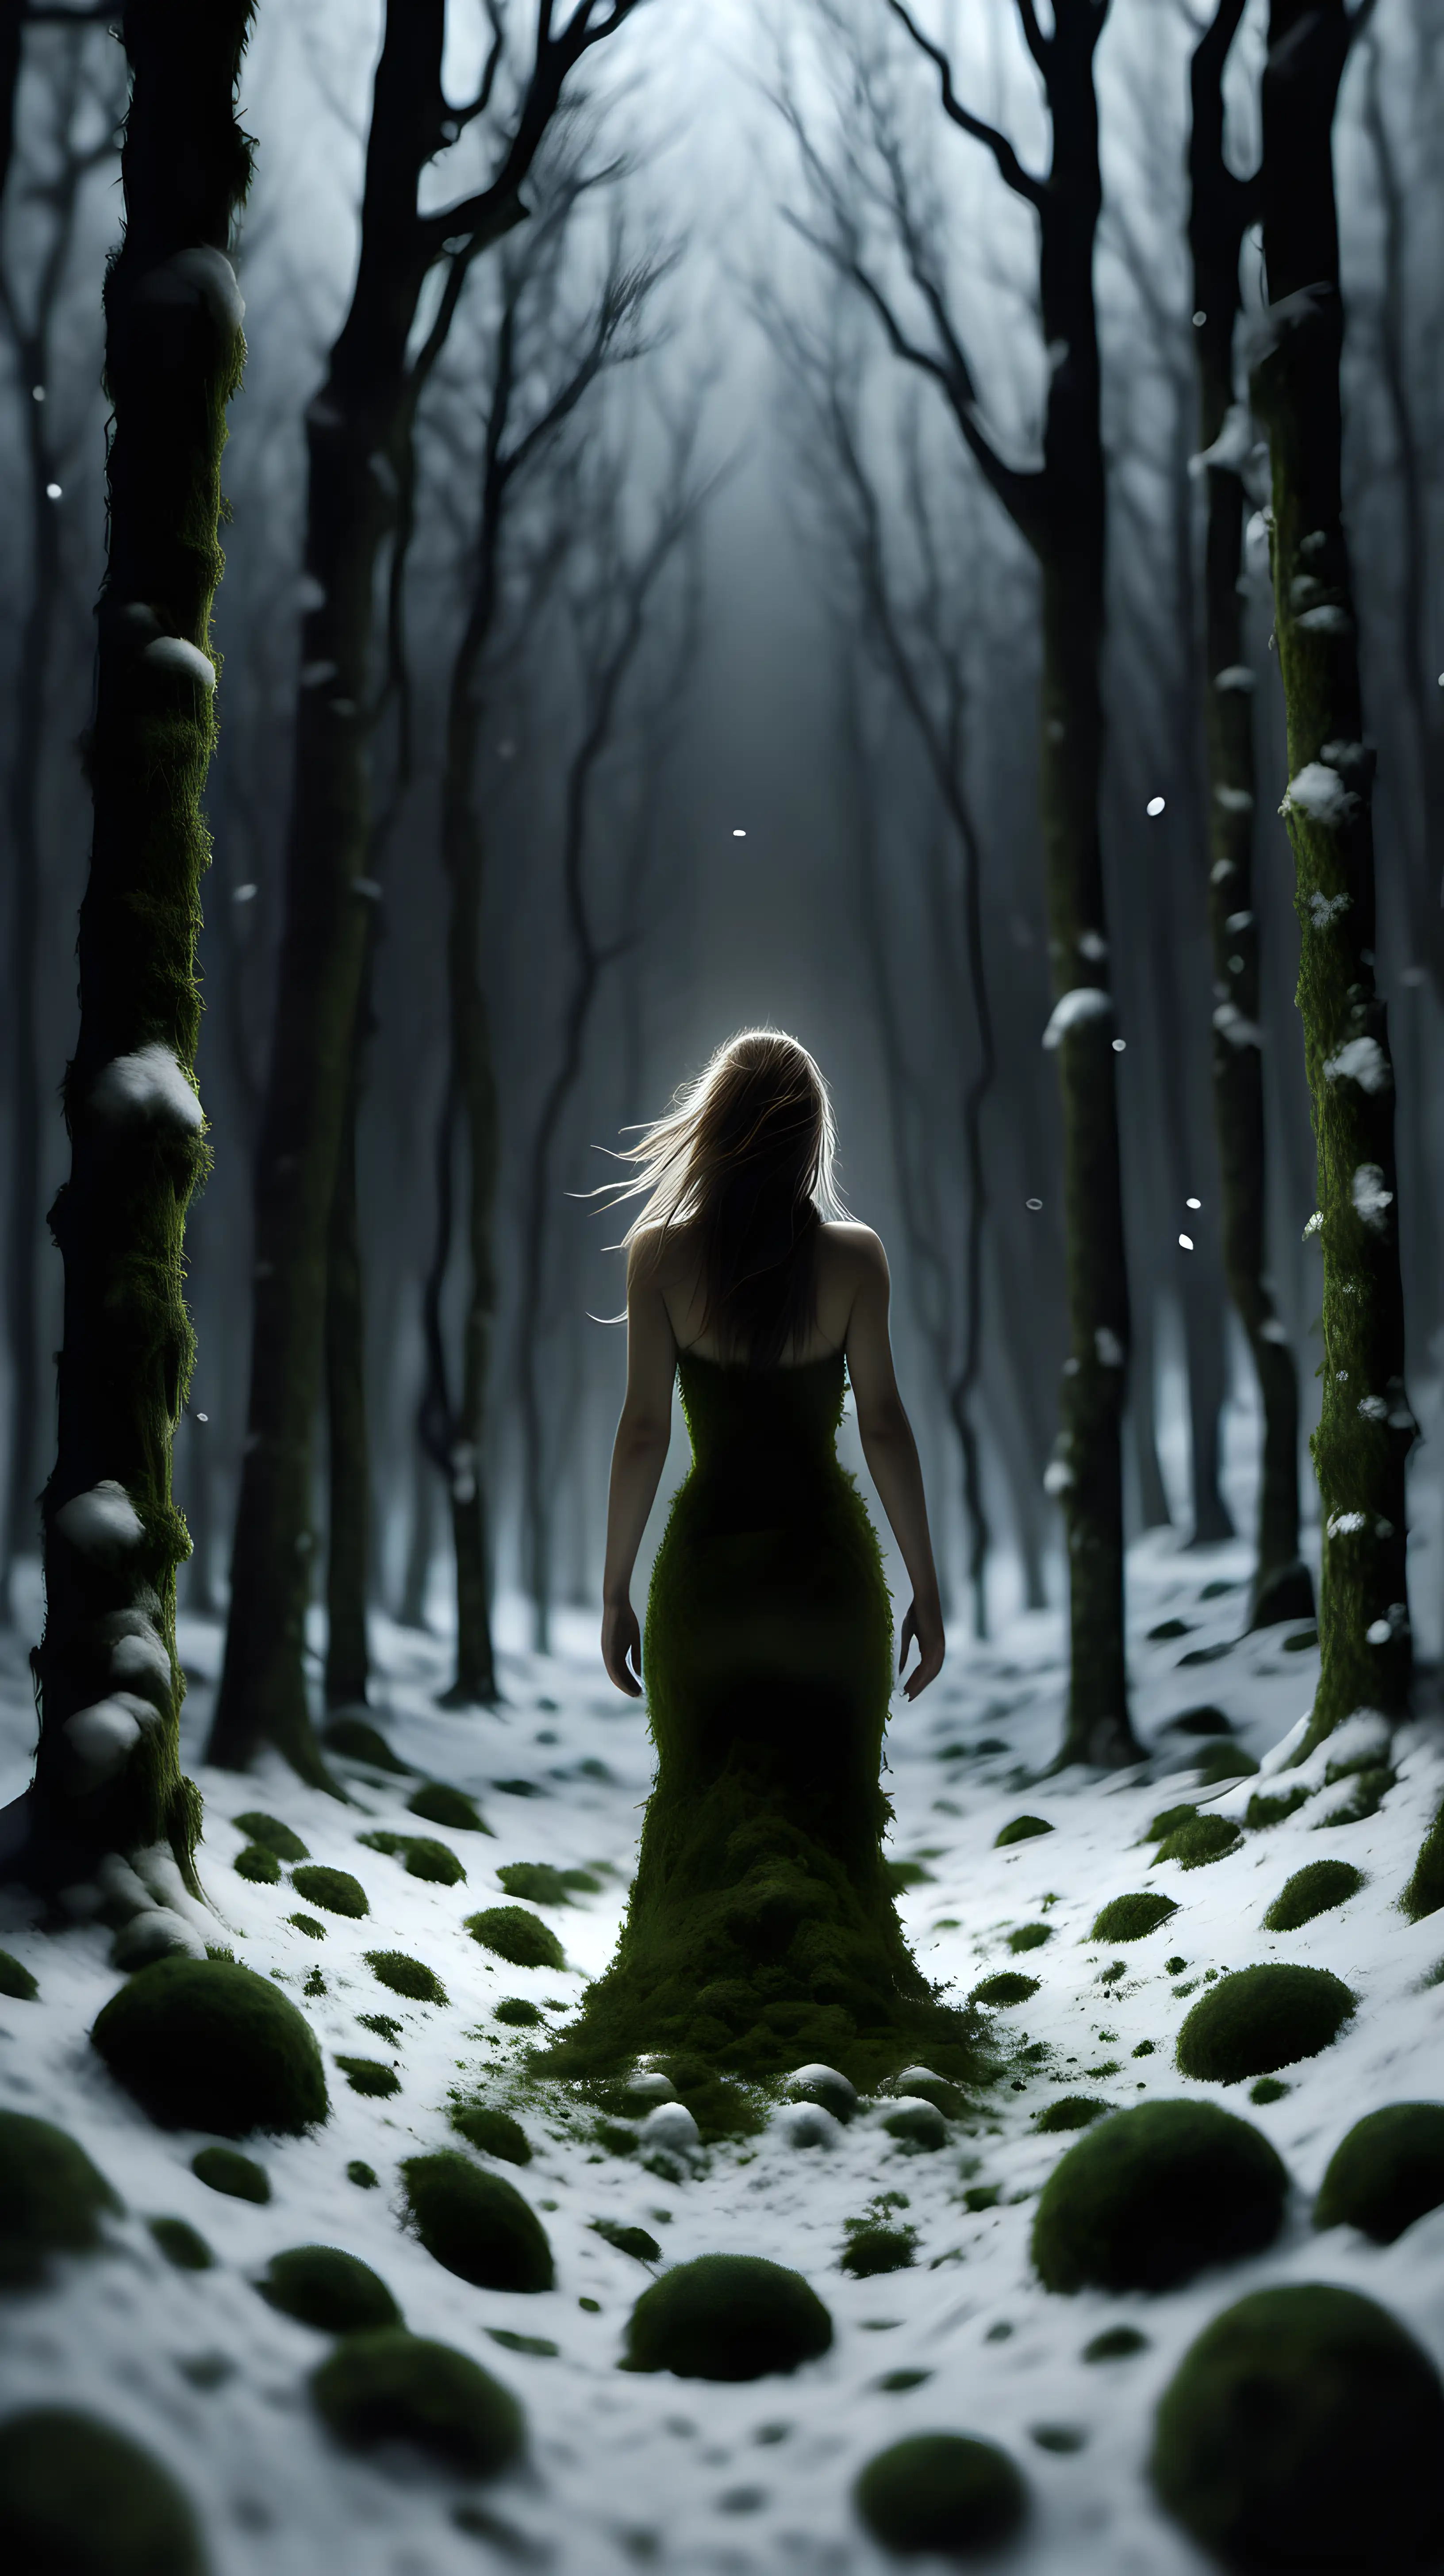 Enchanting Night Snow Forest with Ethereal Female Spirit